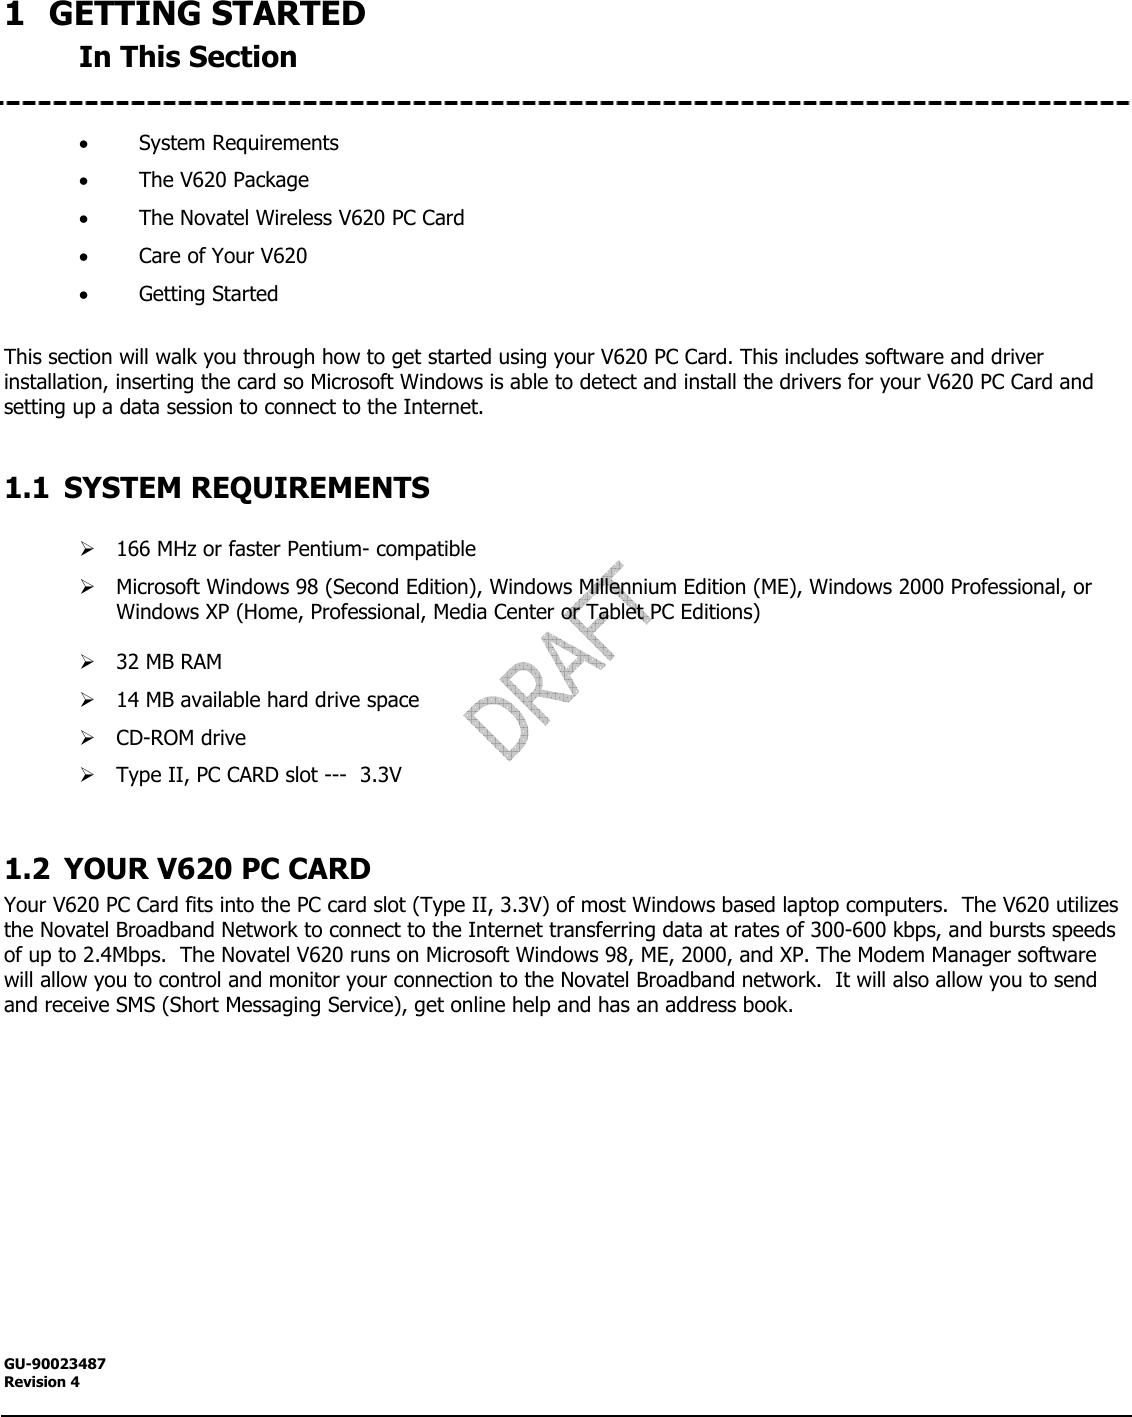  GU-90023487 Revision 4   1 GETTING STARTED In This Section   • System Requirements • The V620 Package • The Novatel Wireless V620 PC Card • Care of Your V620 • Getting Started  This section will walk you through how to get started using your V620 PC Card. This includes software and driver installation, inserting the card so Microsoft Windows is able to detect and install the drivers for your V620 PC Card and setting up a data session to connect to the Internet.  1.1 SYSTEM REQUIREMENTS  ¾ 166 MHz or faster Pentium- compatible ¾ Microsoft Windows 98 (Second Edition), Windows Millennium Edition (ME), Windows 2000 Professional, or Windows XP (Home, Professional, Media Center or Tablet PC Editions)  ¾ 32 MB RAM  ¾ 14 MB available hard drive space ¾ CD-ROM drive ¾ Type II, PC CARD slot ---  3.3V  1.2 YOUR V620 PC CARD Your V620 PC Card fits into the PC card slot (Type II, 3.3V) of most Windows based laptop computers.  The V620 utilizes the Novatel Broadband Network to connect to the Internet transferring data at rates of 300-600 kbps, and bursts speeds of up to 2.4Mbps.  The Novatel V620 runs on Microsoft Windows 98, ME, 2000, and XP. The Modem Manager software will allow you to control and monitor your connection to the Novatel Broadband network.  It will also allow you to send and receive SMS (Short Messaging Service), get online help and has an address book.  